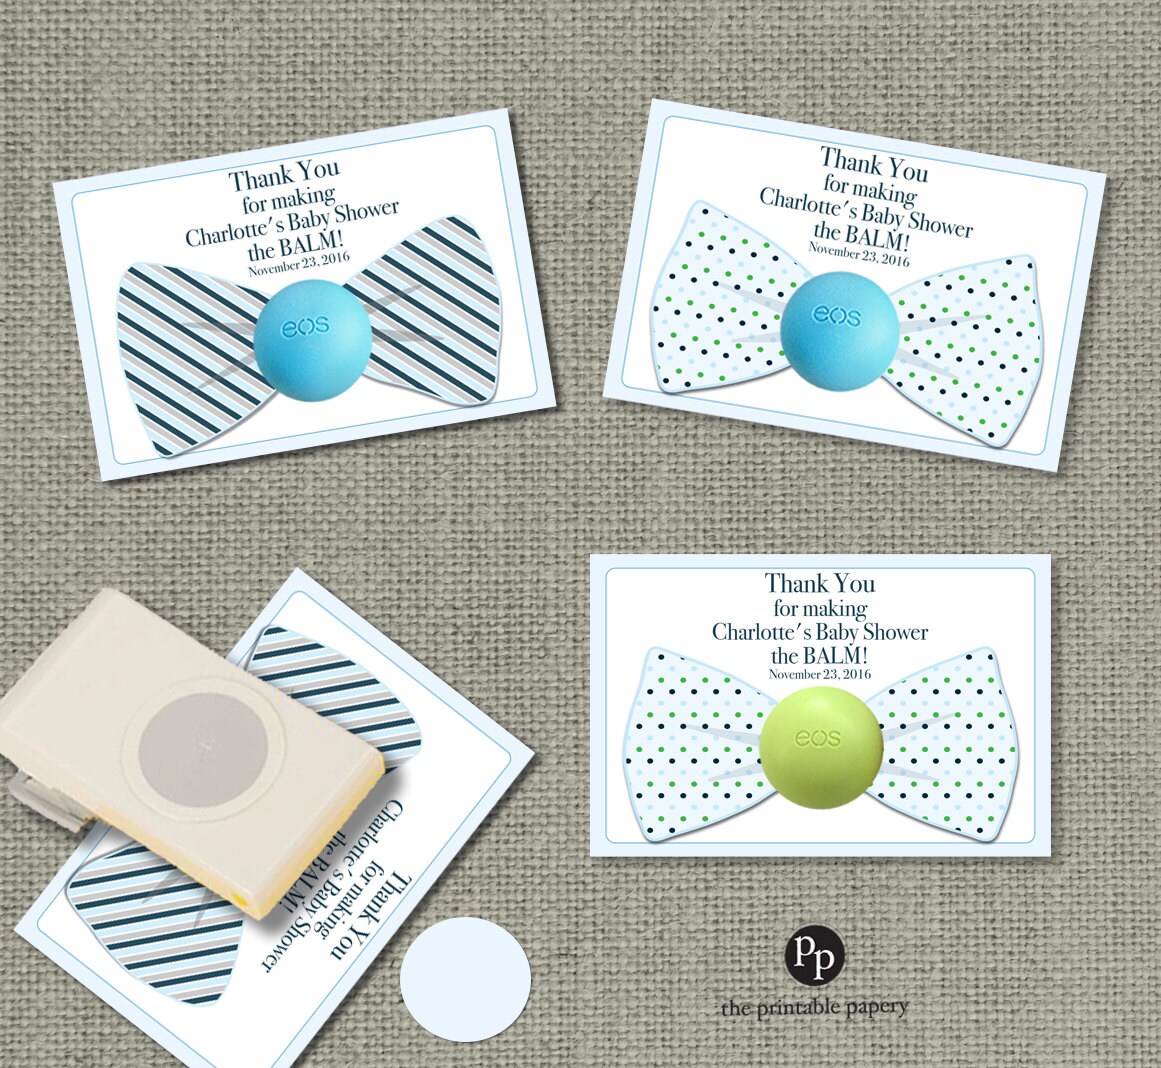 Bow Tie Baby Shower Gift Tags For Eos Lip Balm Gifts Thank You Tags Bow1 Eos1